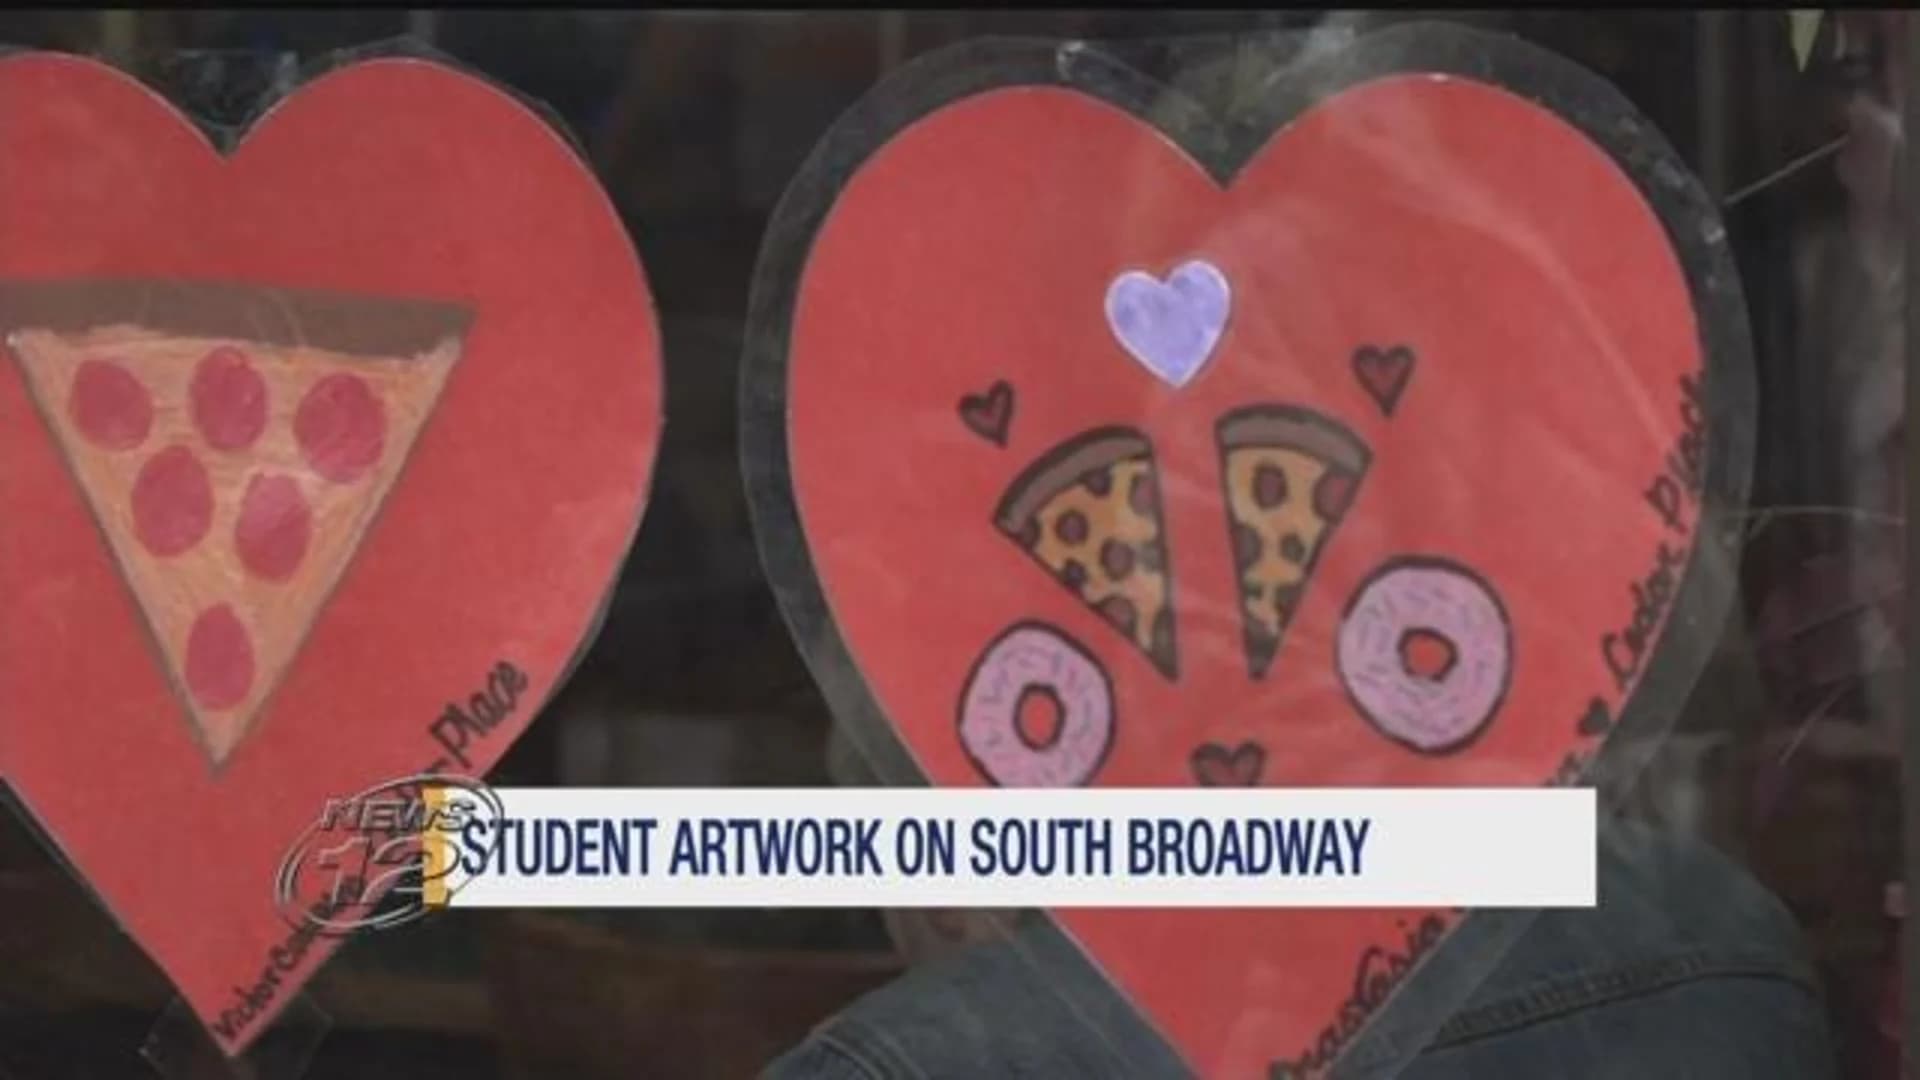 Yonkers students, South Broadway businesses throw art show